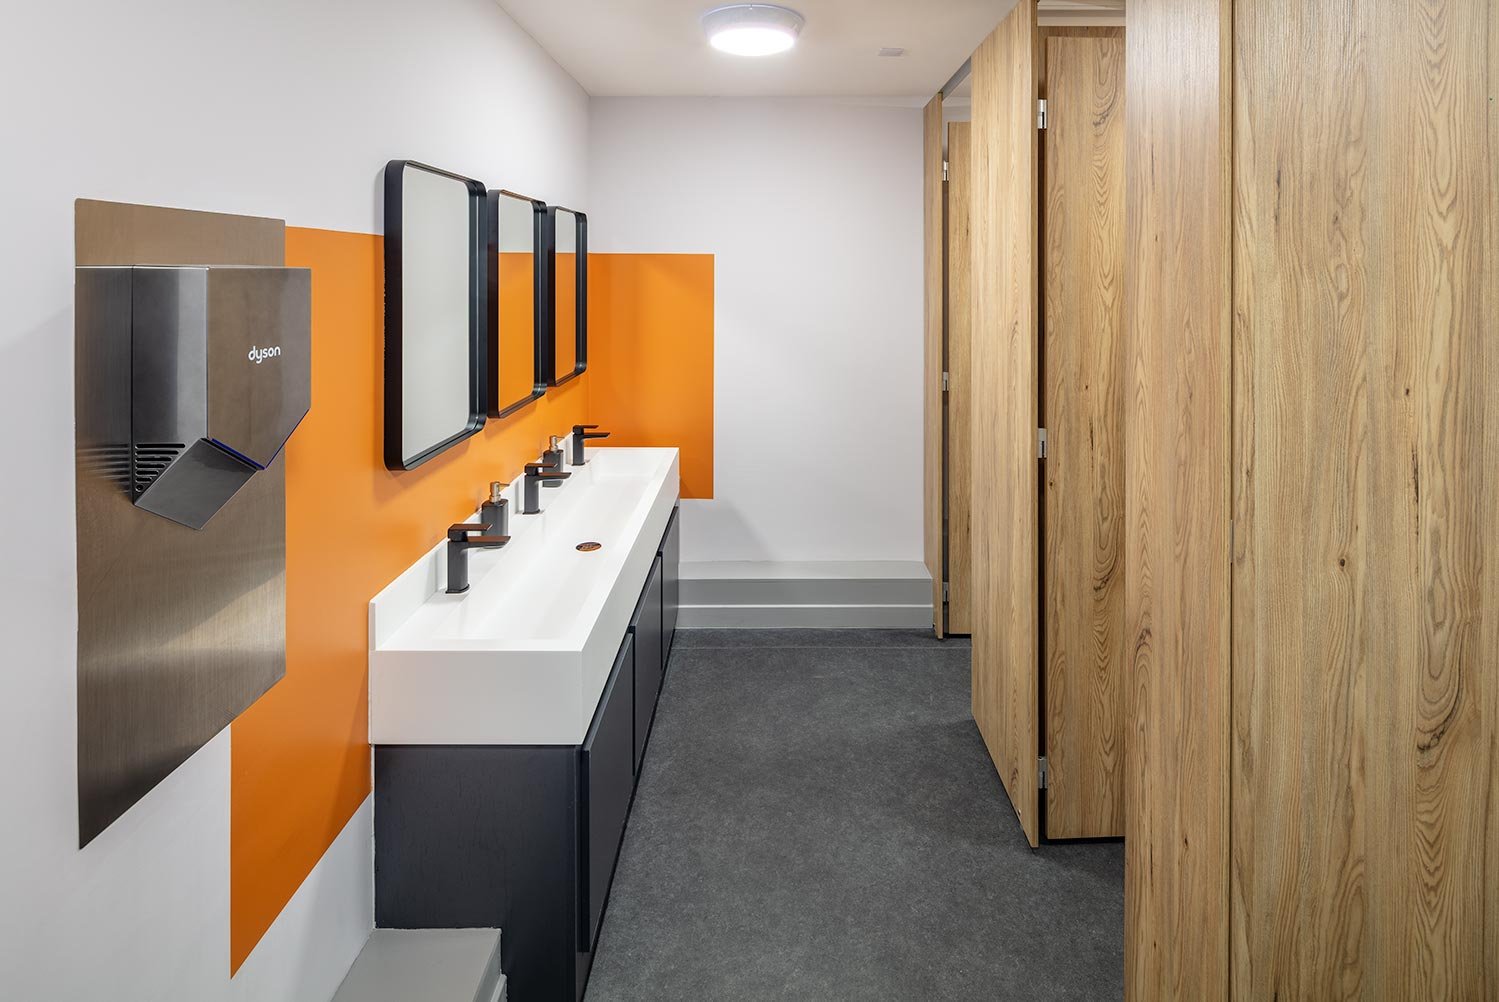 Refurbished office toilets